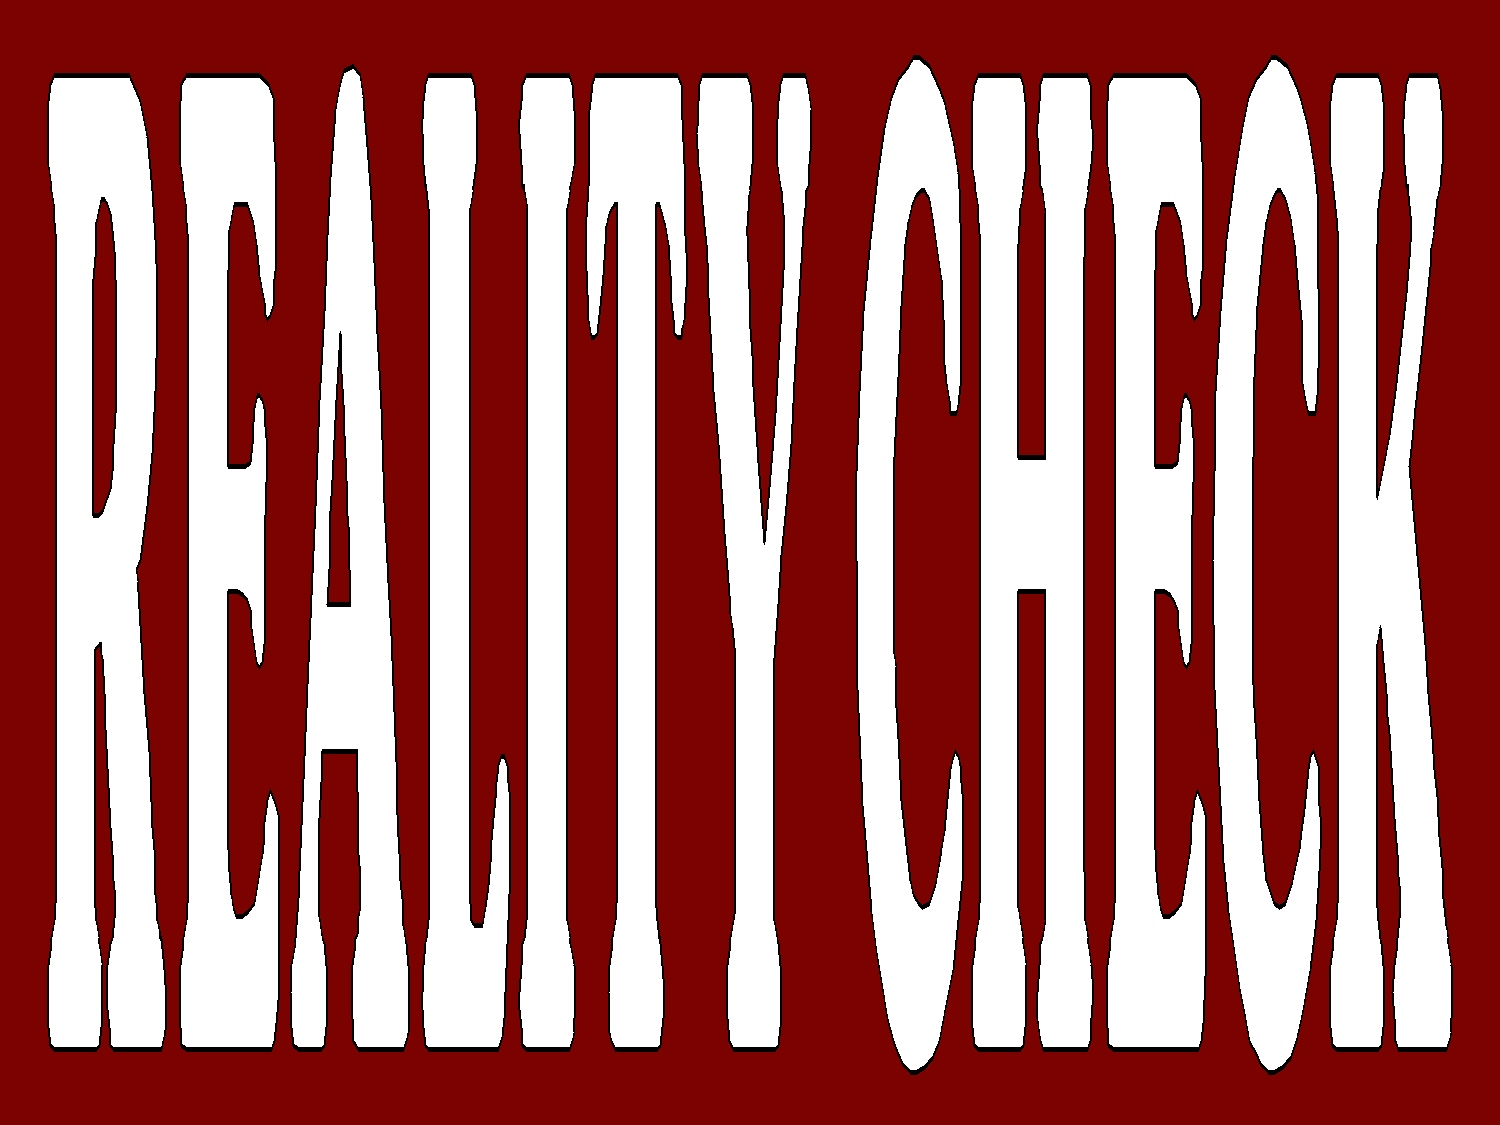 reality-check-red.jpg